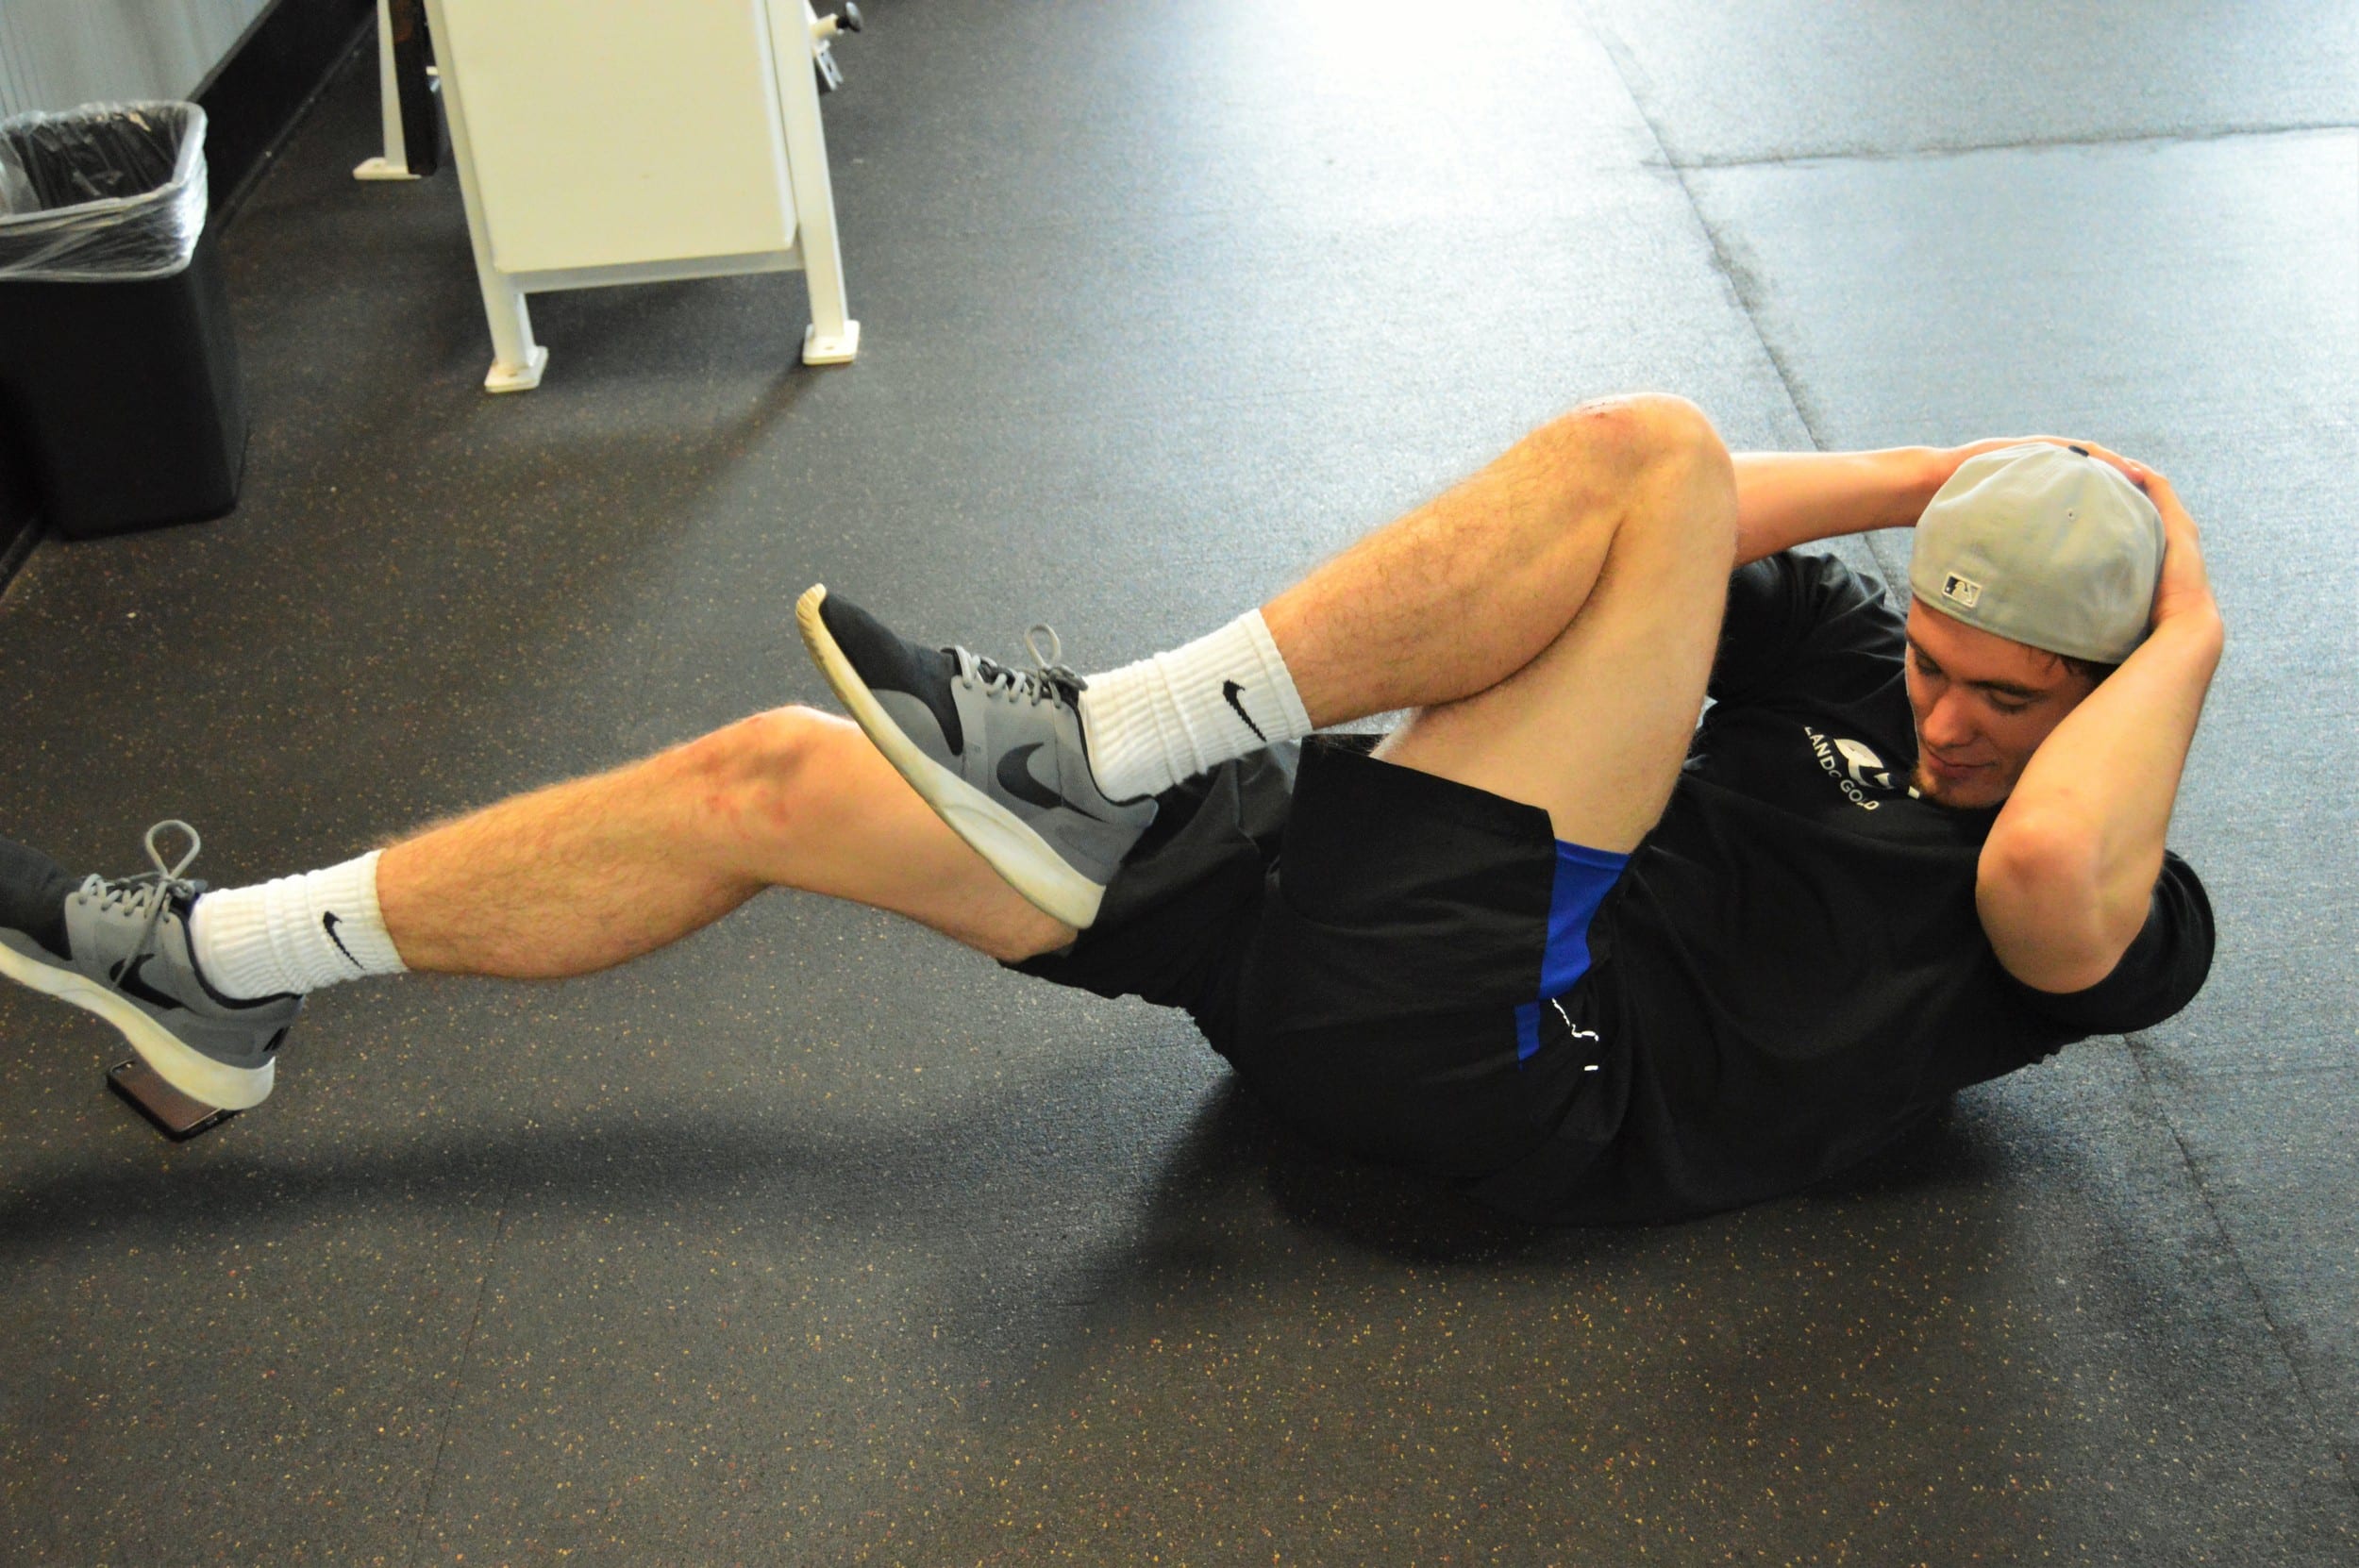 This bicycle exercise works your abdominals. Try to do three sets of 20 reps. Keep it strong!&nbsp;